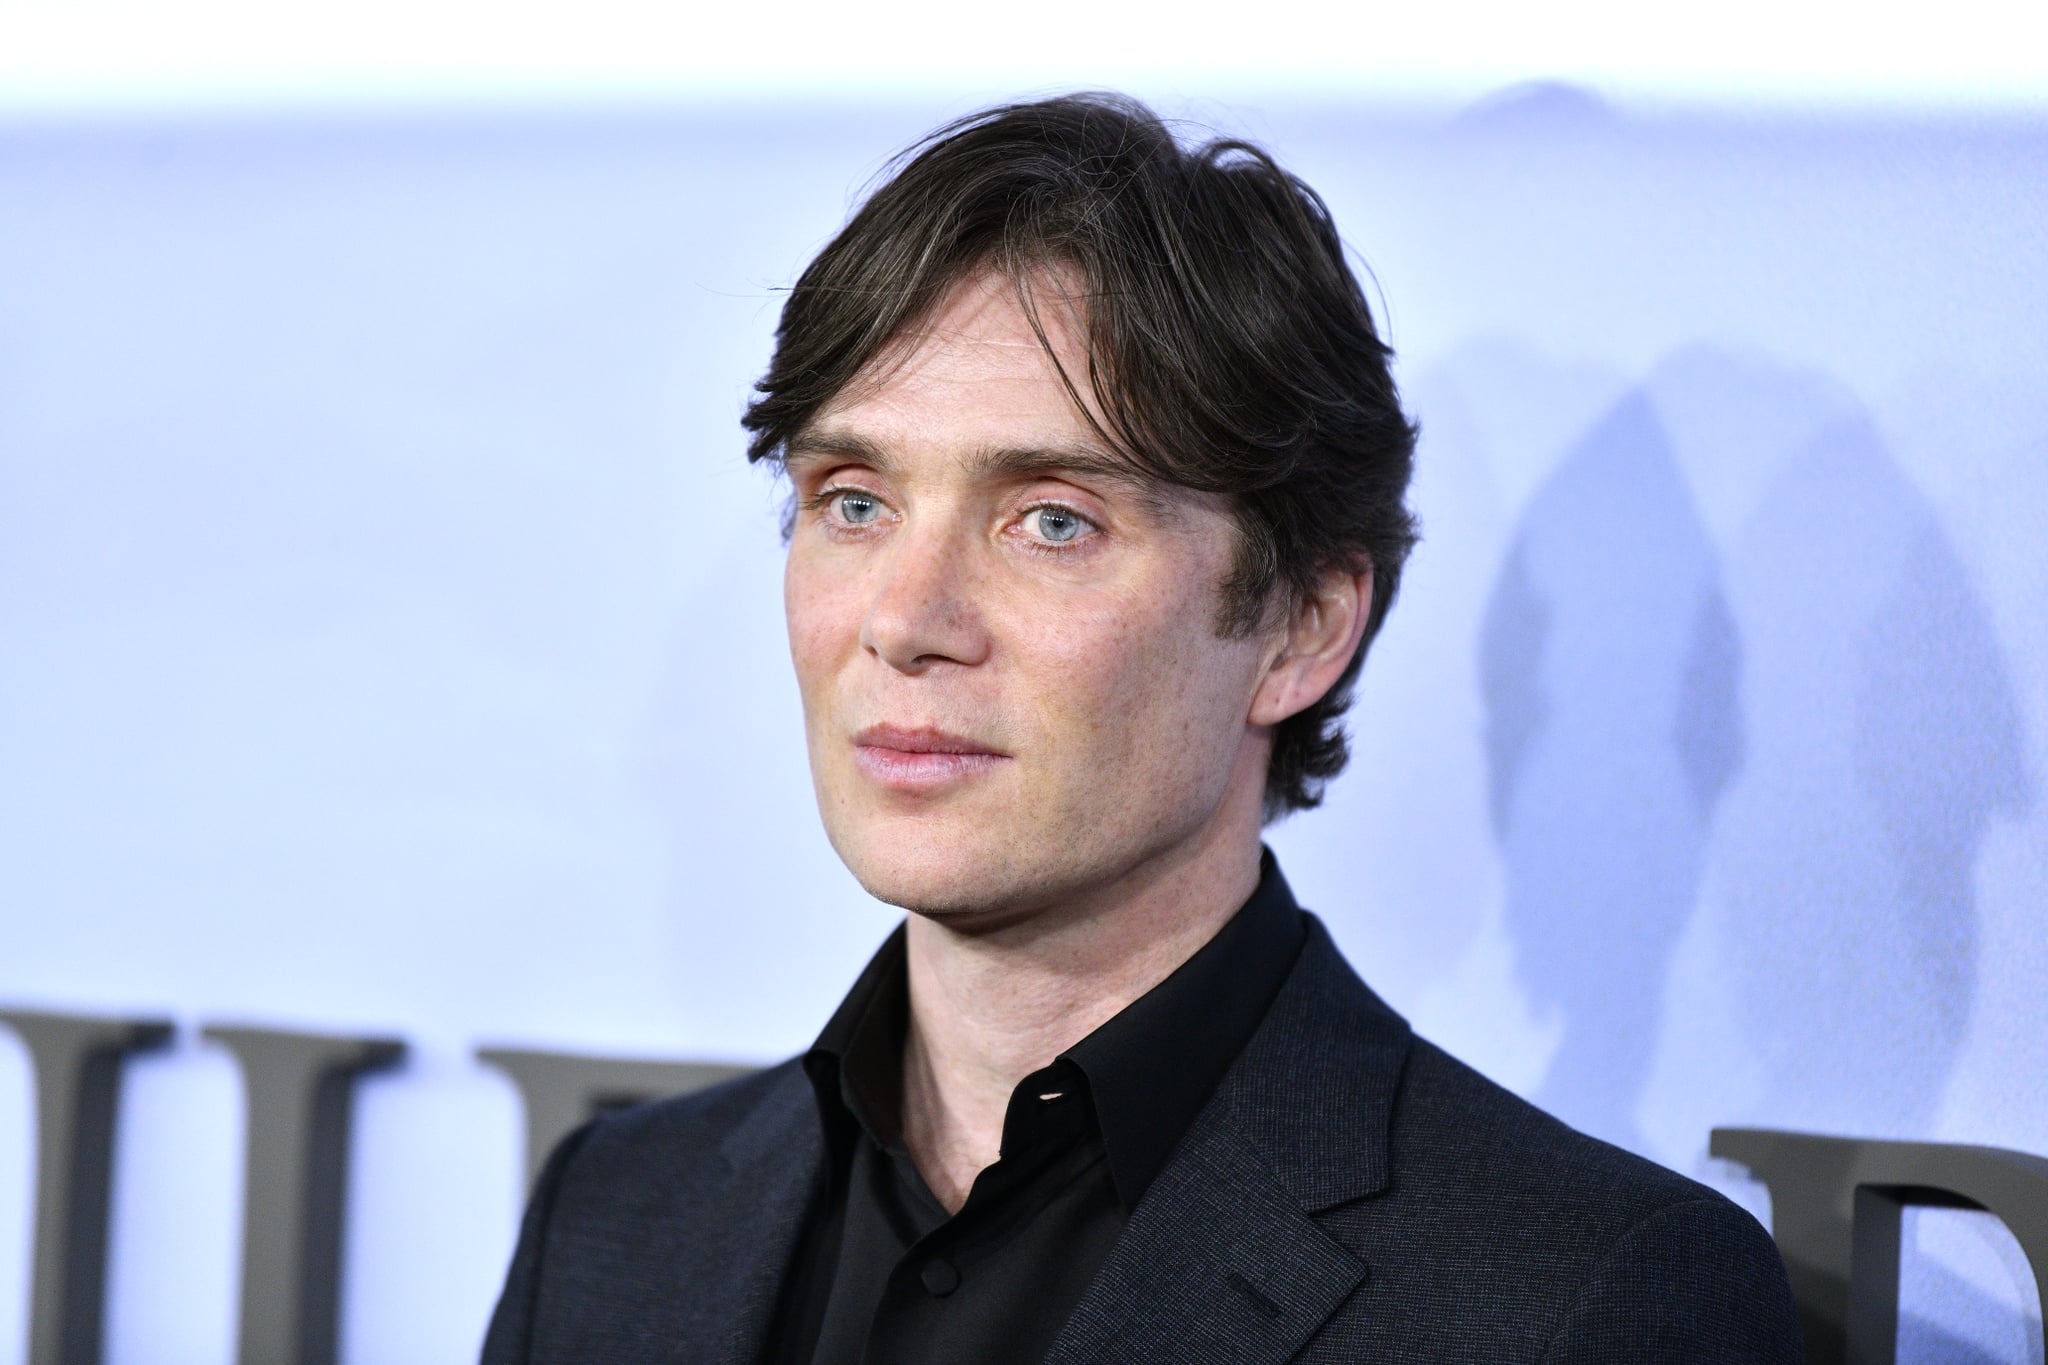 NEW YORK, NEW YORK - MARCH 8: Cillian Murphy attends the world premiere of 